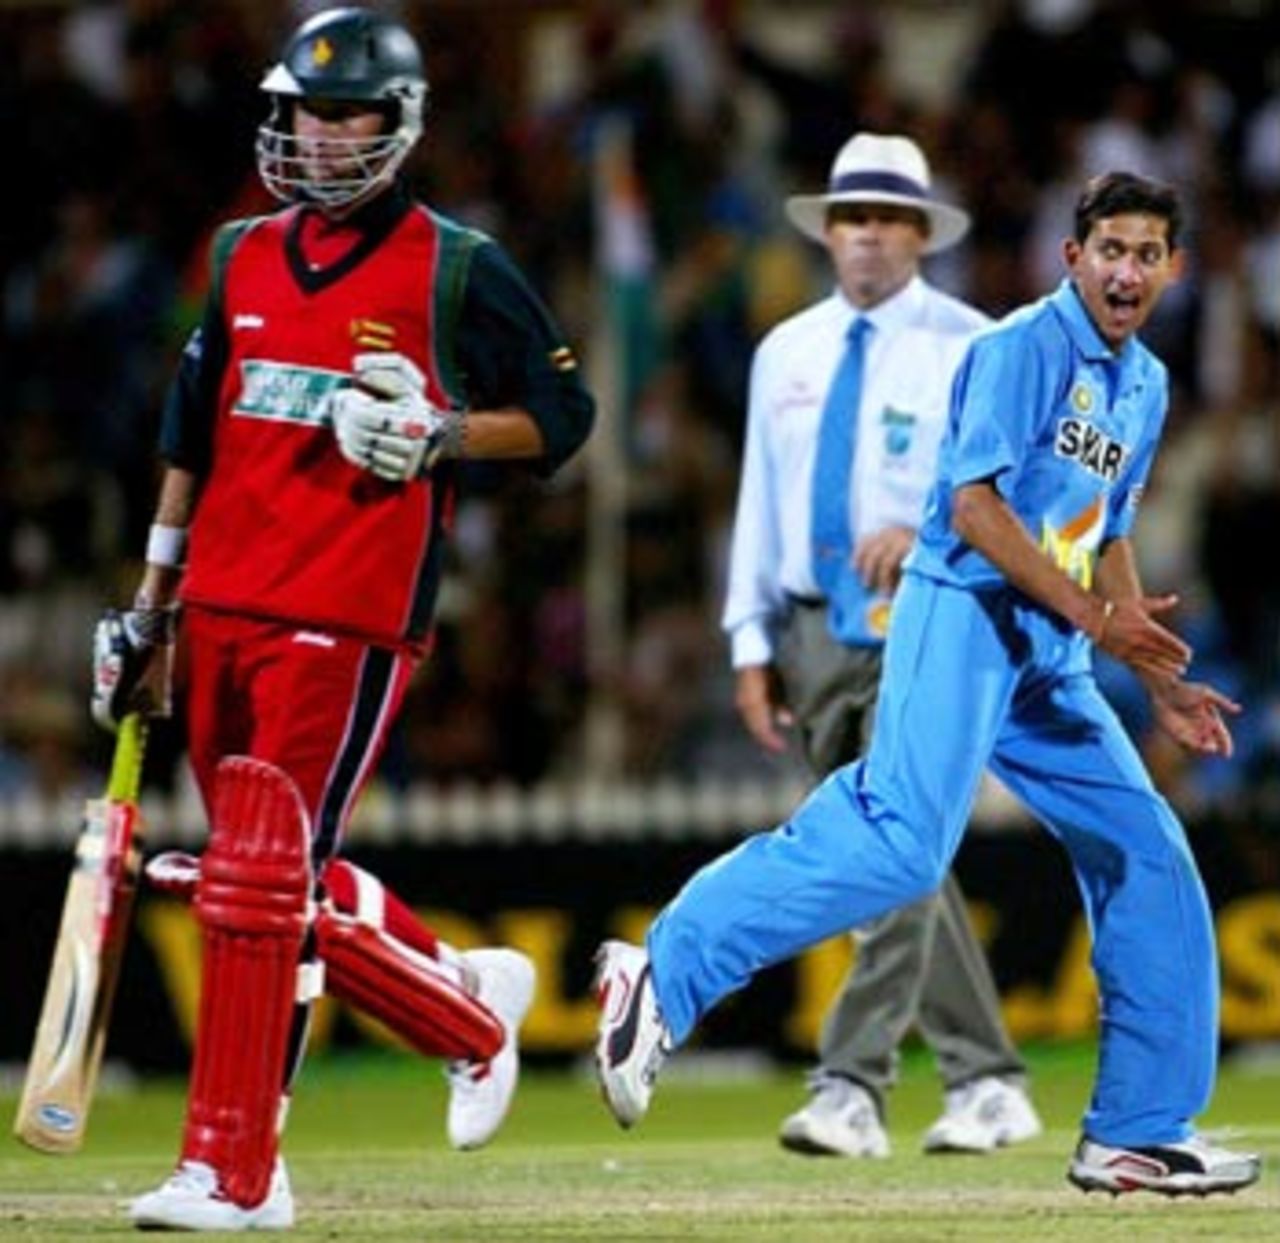 Sean Ervine was tragically run out and India were back in the hunt, India v Zimbabwe, VB Series, 8th ODI, Adelaide, January 24, 2004